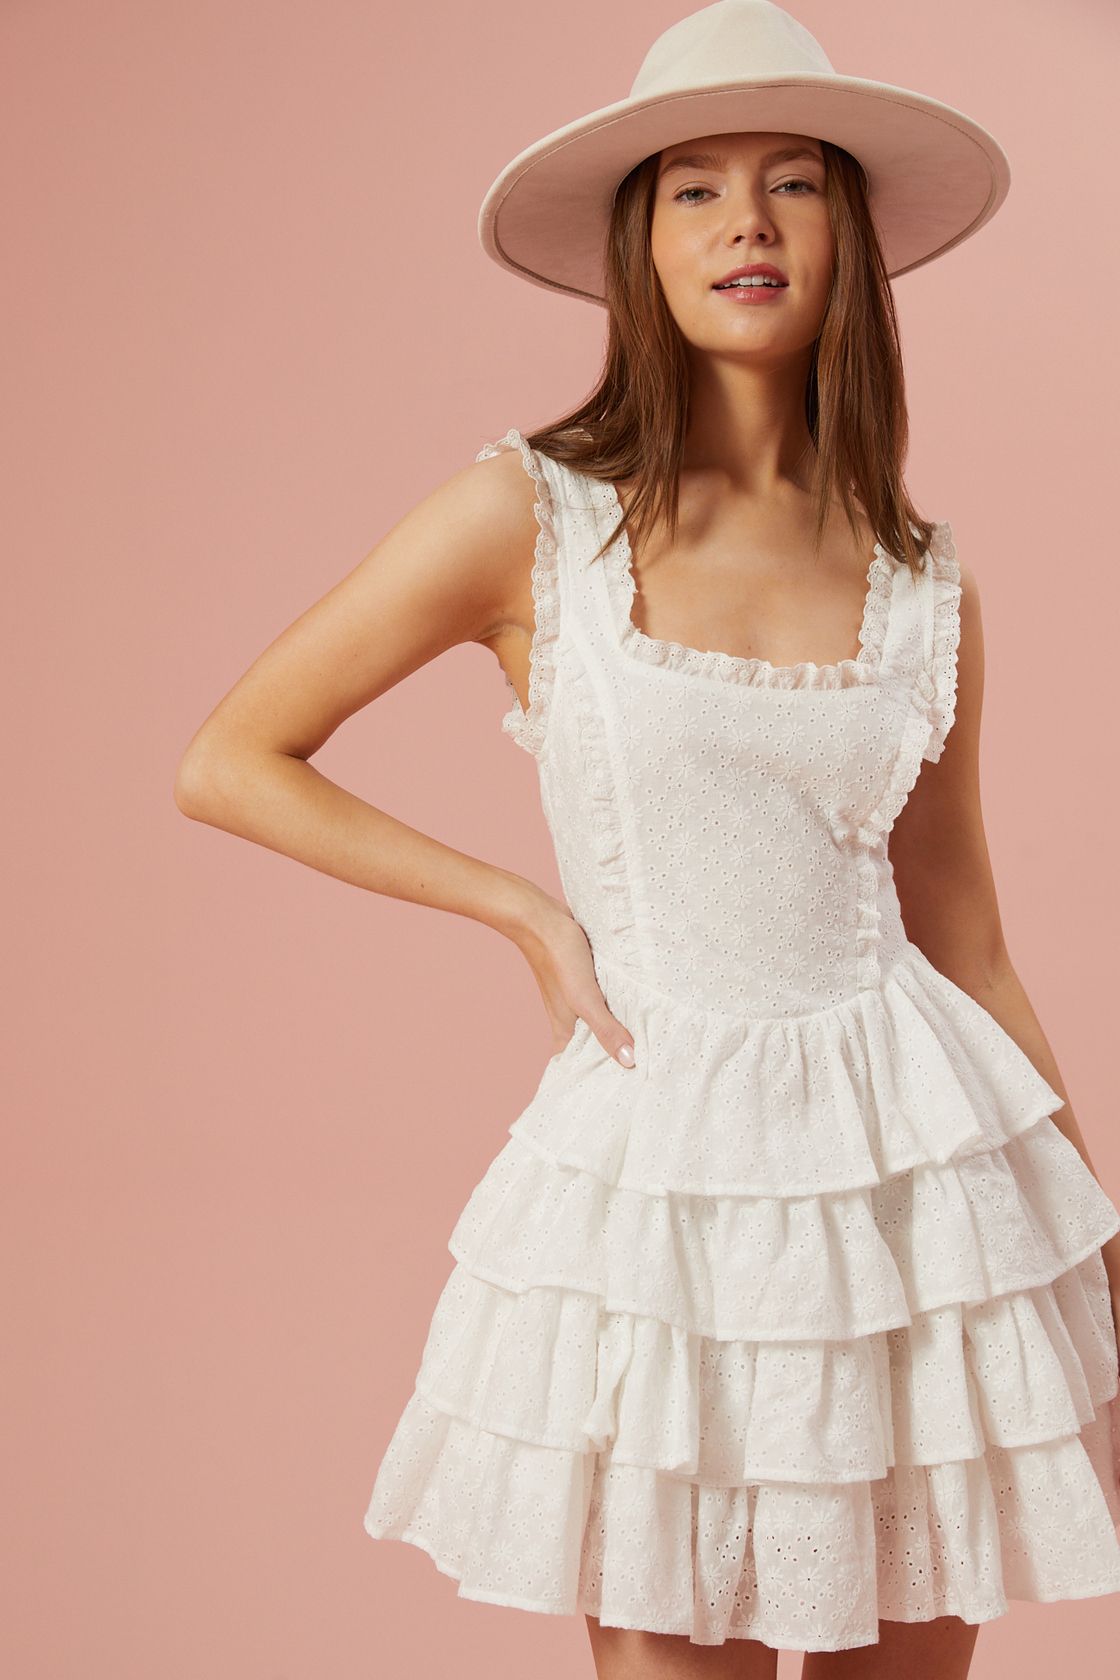 Hailey Layered Eyelet Dress in White | Altar'd State | Altar'd State